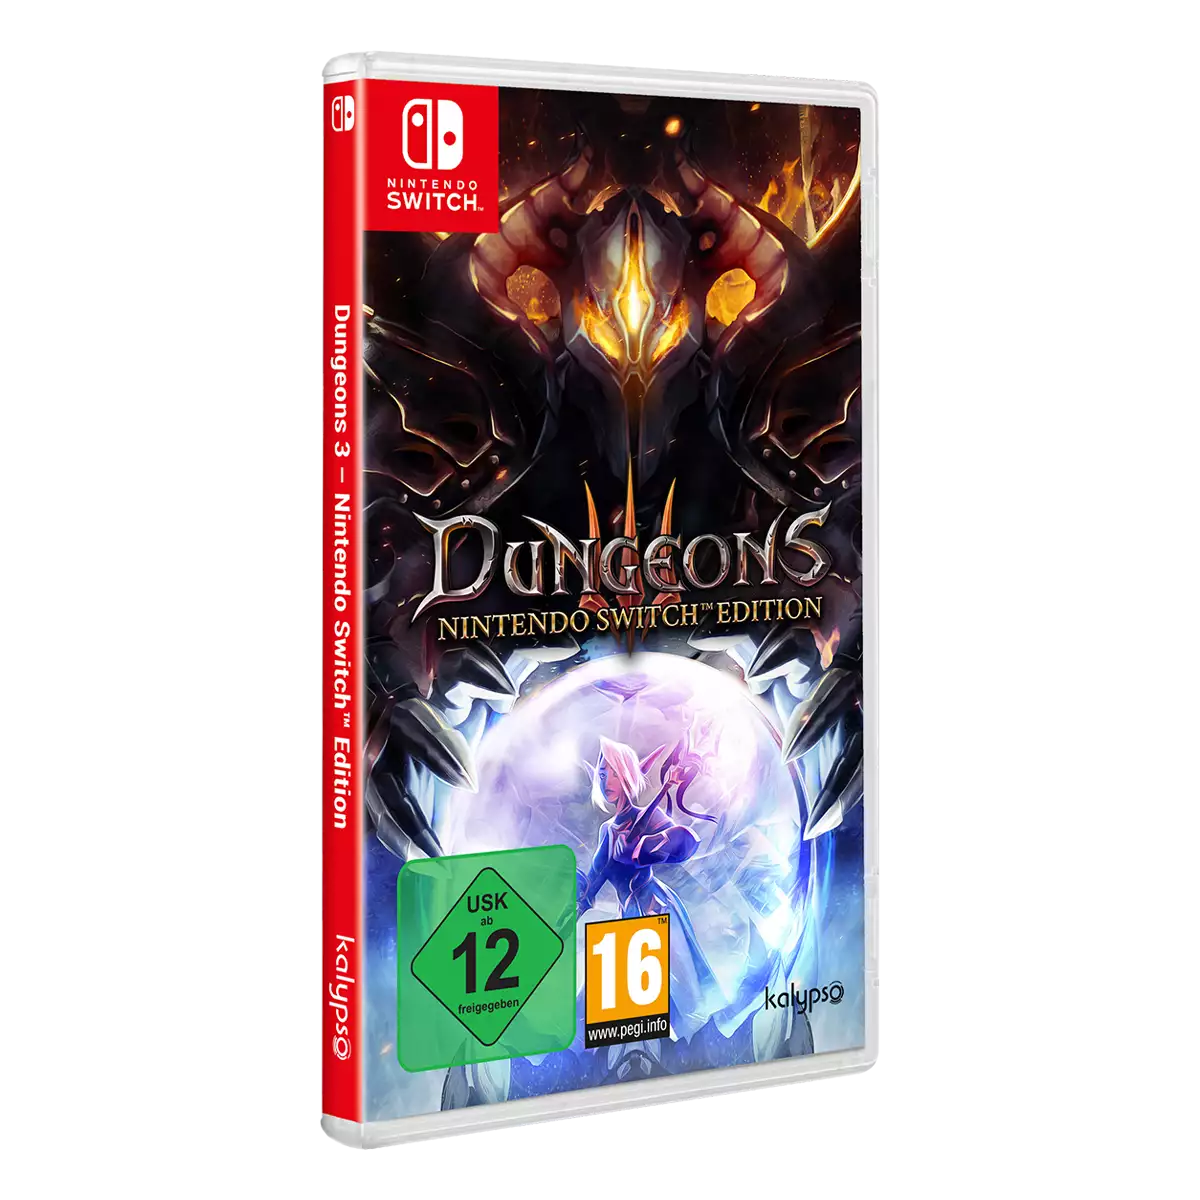 Dungeons 3 - Nintendo Switch Edition (Switch) Image 3